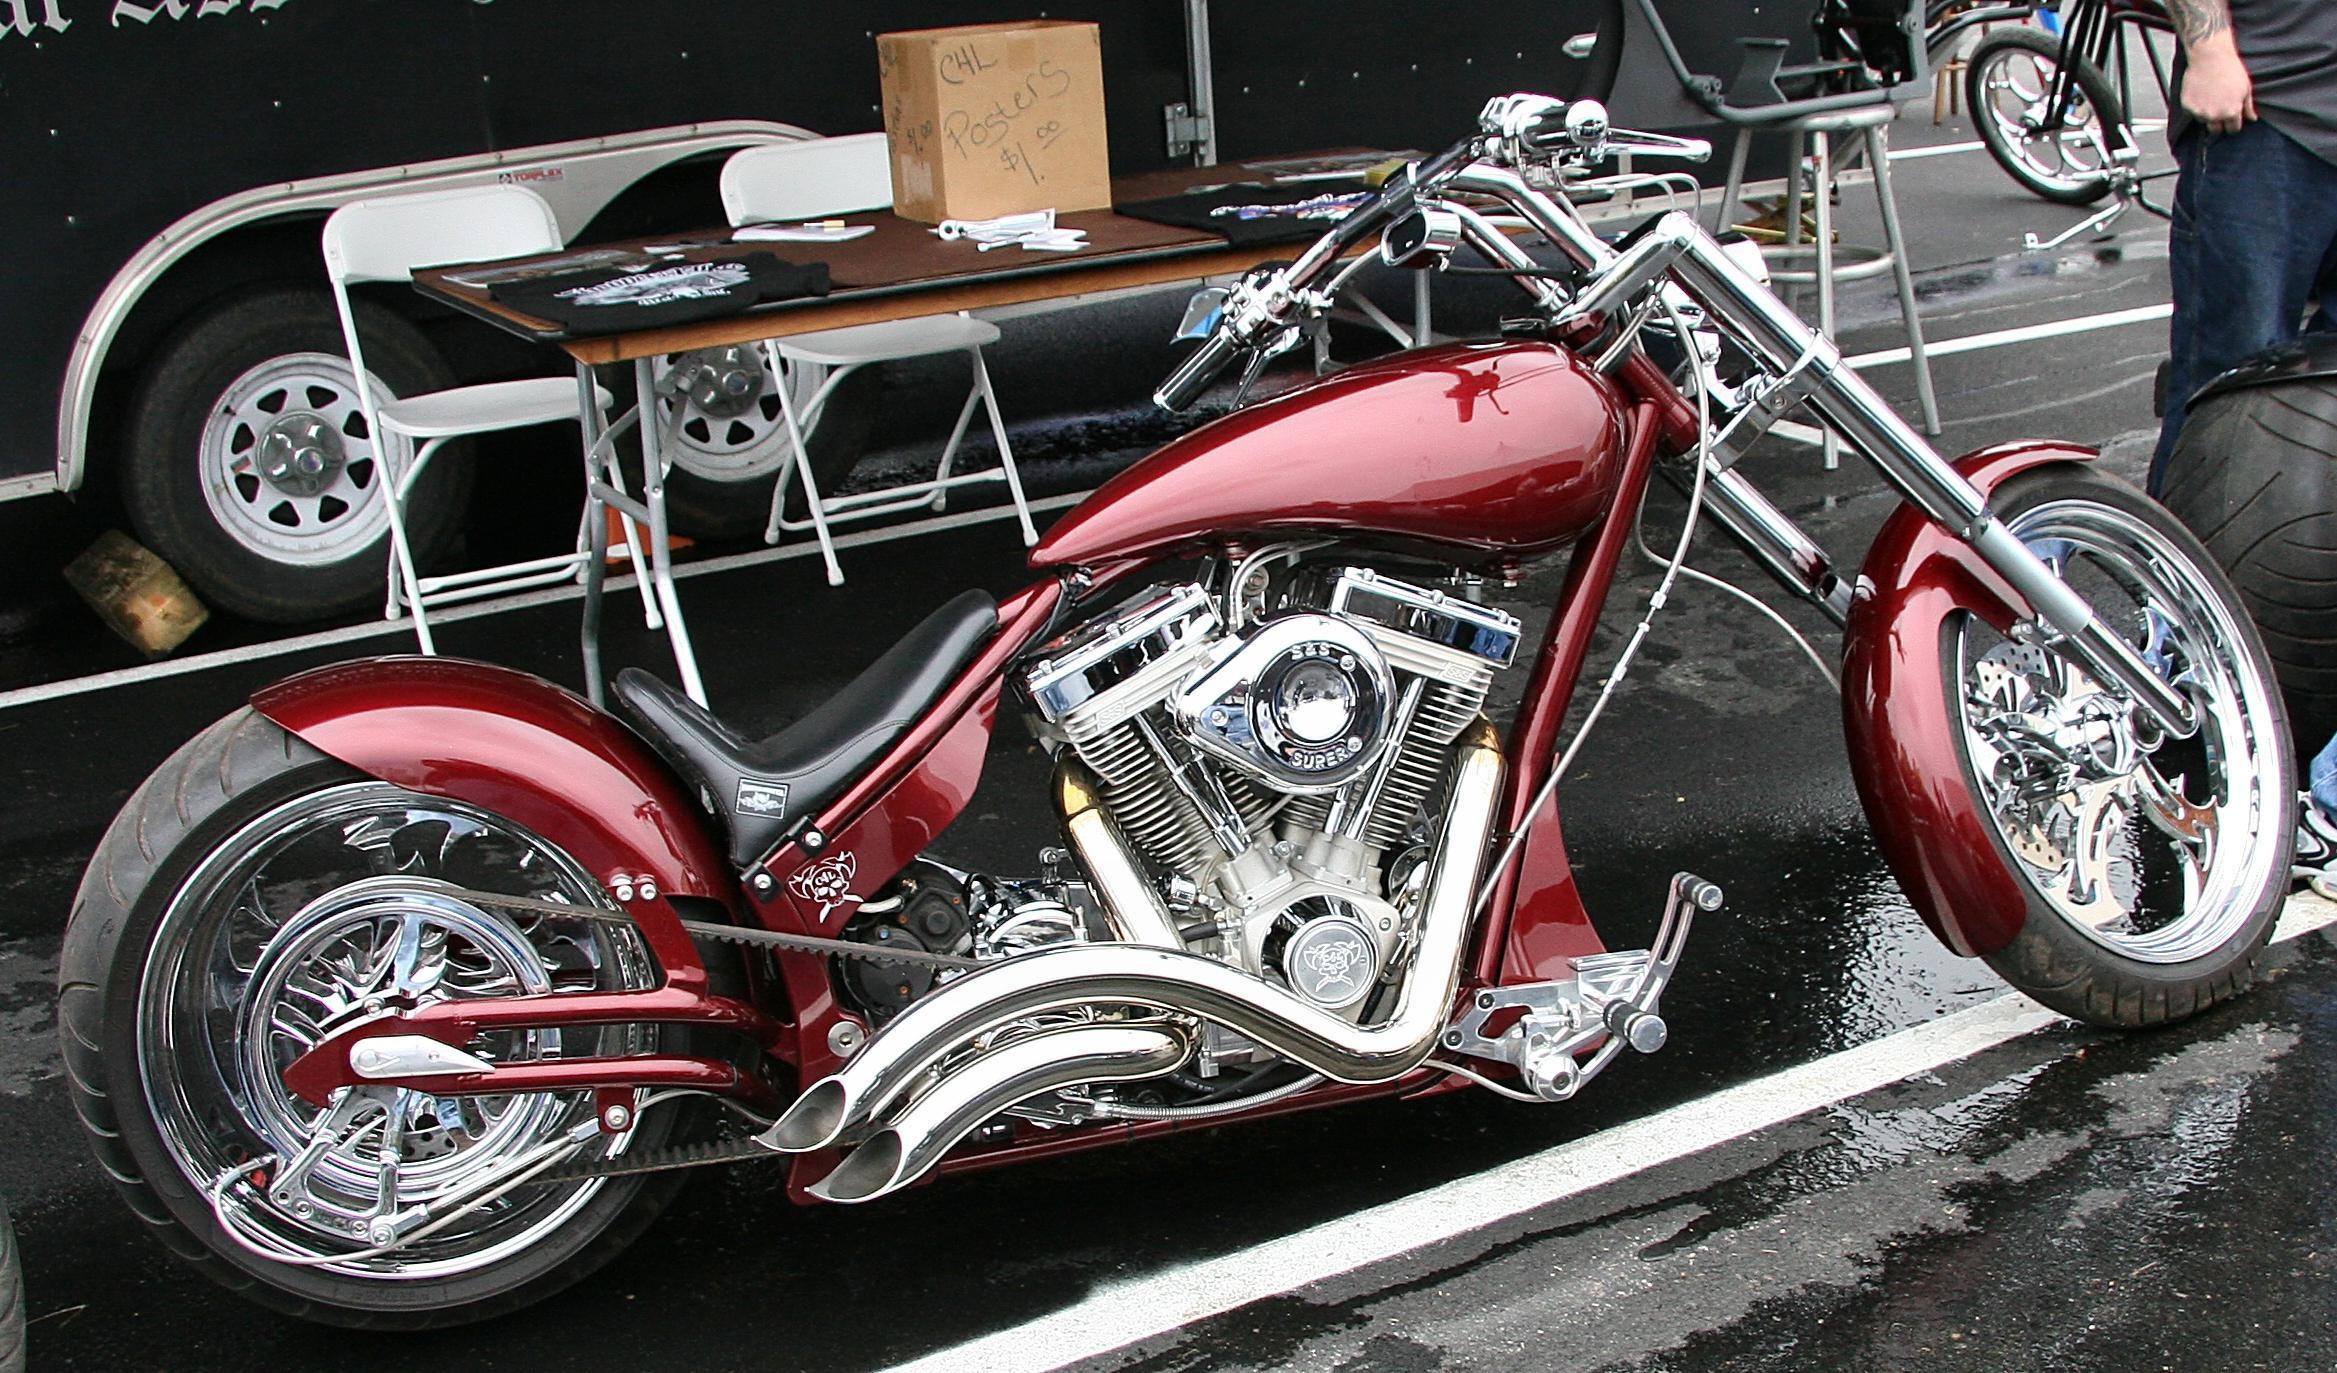 Free HD Choppers wallpapers, West Cost Choppers theme bikes, Amazing Red  choppers